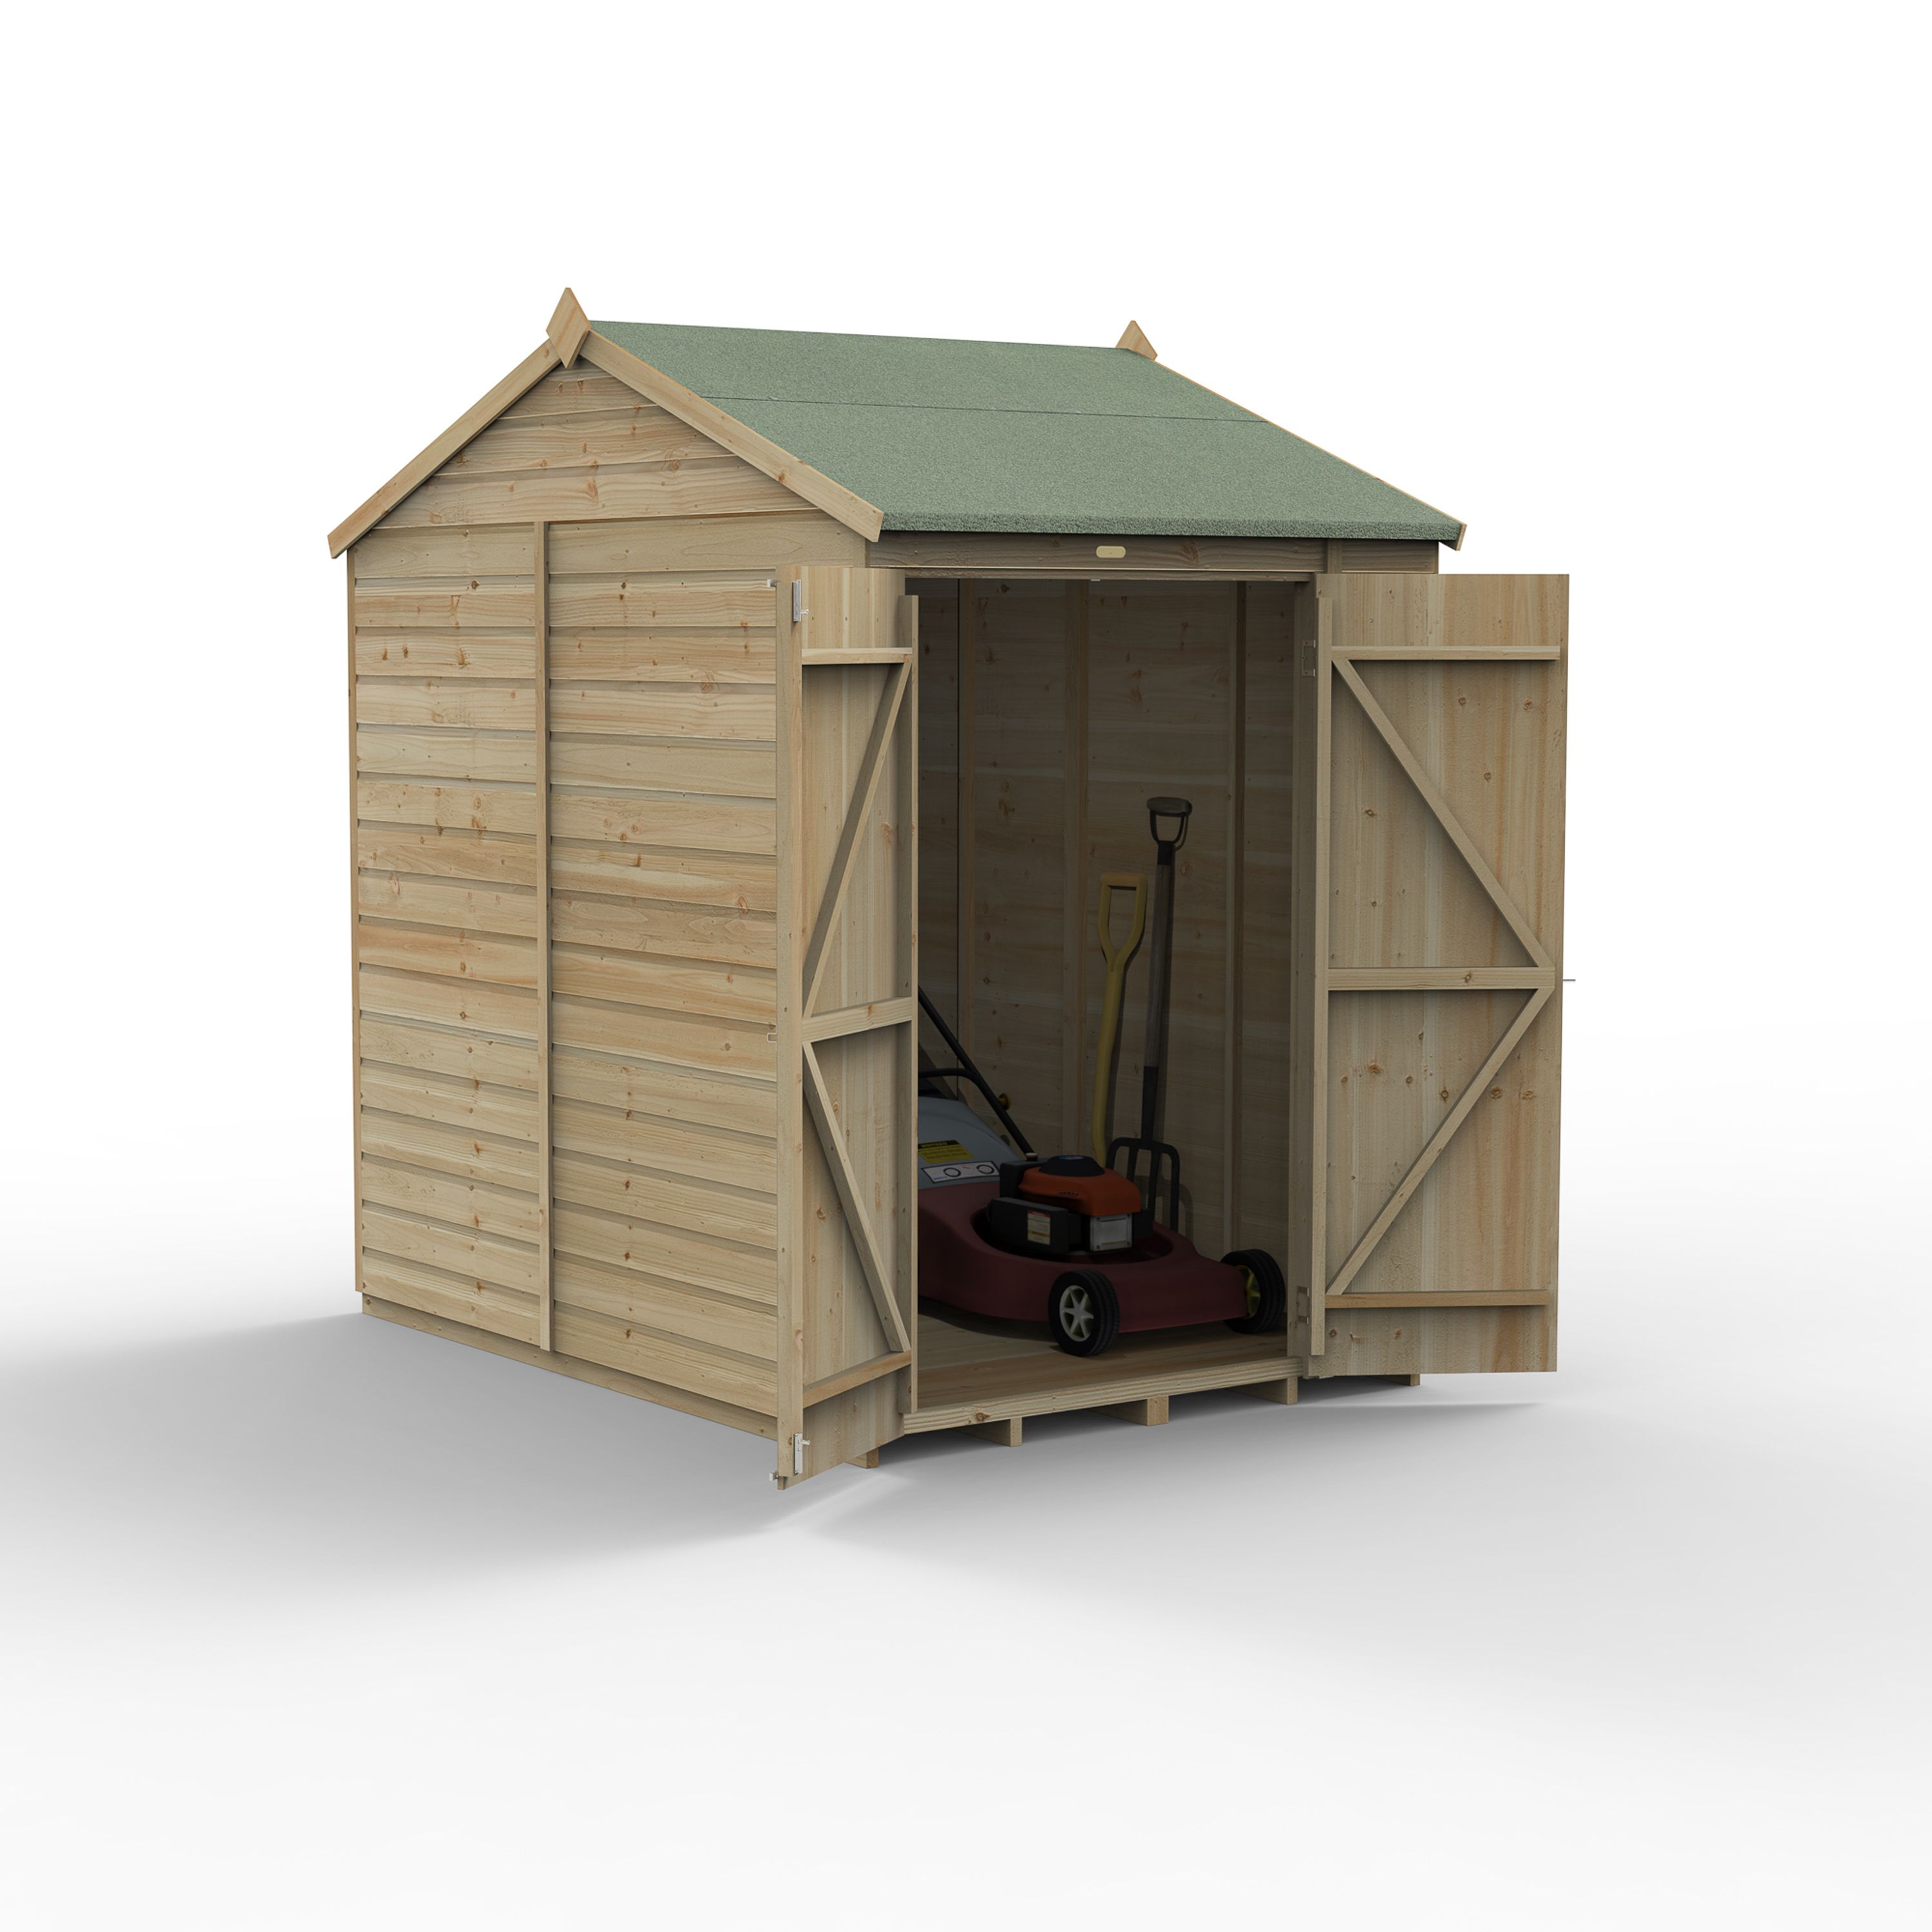 Forest Garden Beckwood 7x5 ft Reverse apex Natural timber Wooden 2 door Shed with floor (Base included) - Assembly not required